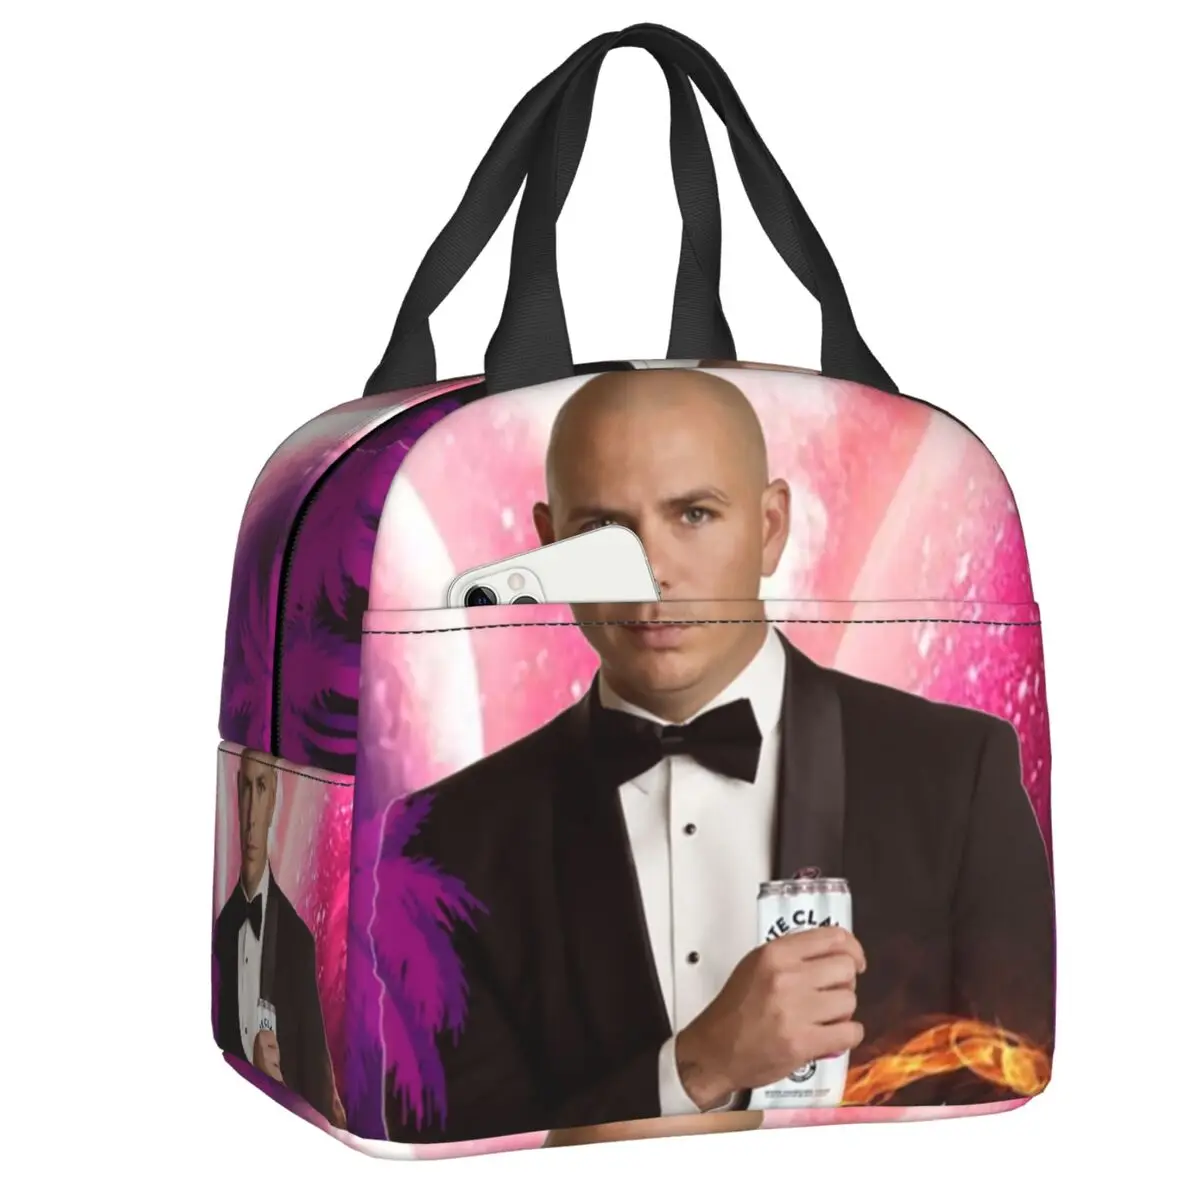 

Mr World Pitbull Thermal Insulated Lunch Bags Women American Rapper Singer Resuable Lunch Tote Office Outdoor Storage Food Box